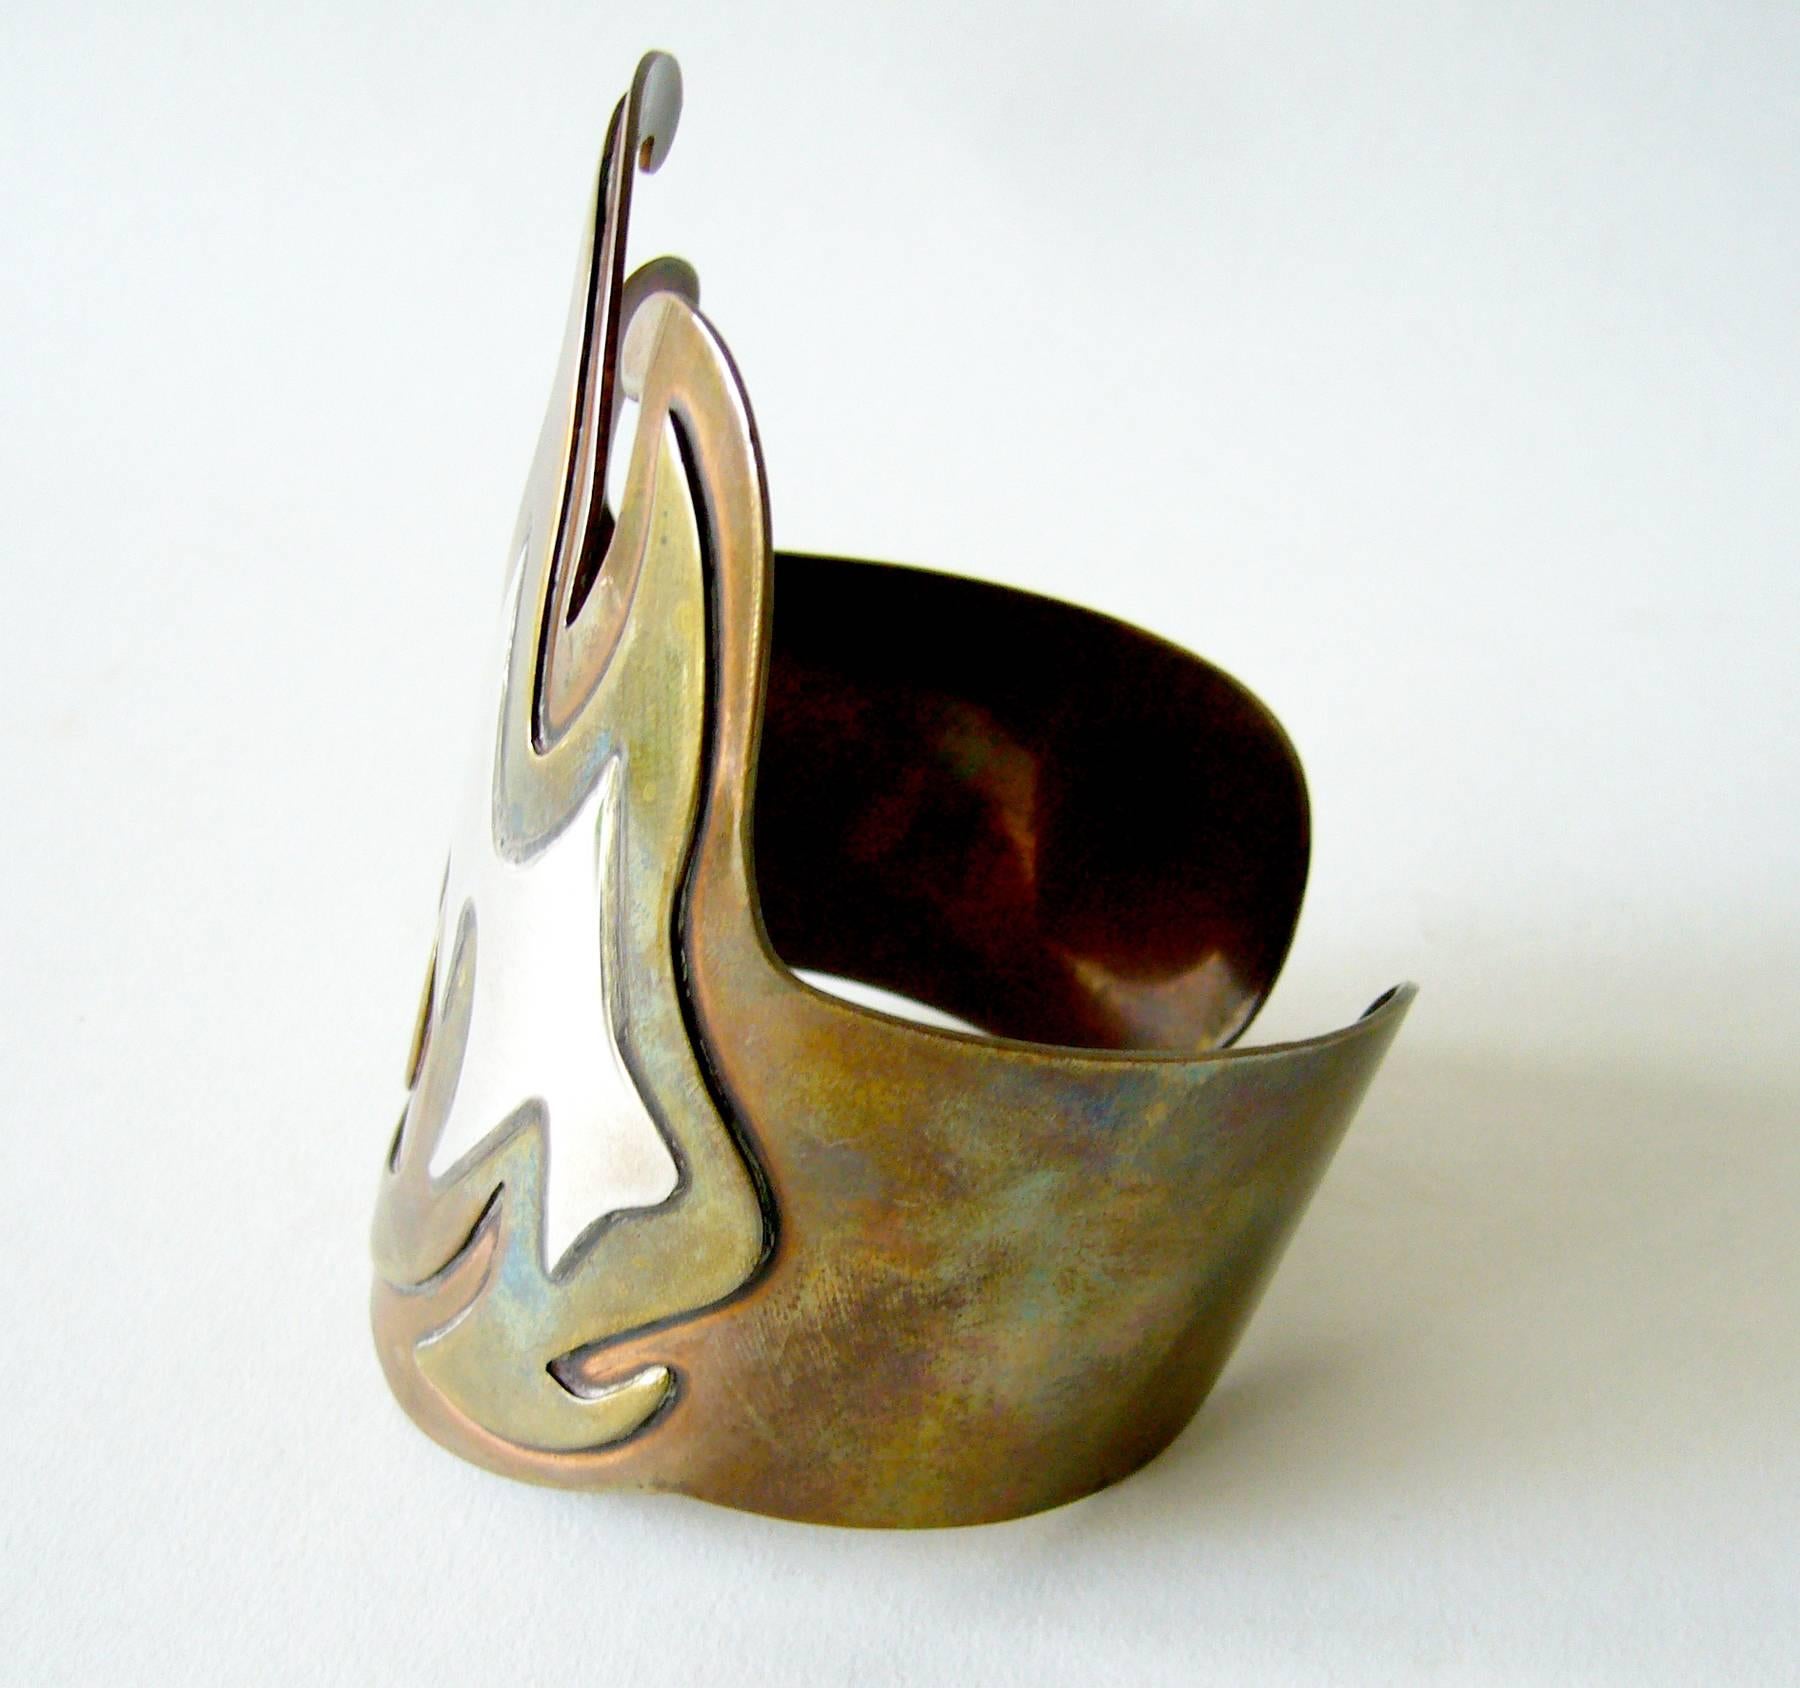 Large scale Mexican modern copper, brass and silver bracelet with flame design.  Bracelet is suitable for a large wrist on a man or for a mid or upper arm on a woman depending on the arm size.  It measures about 9